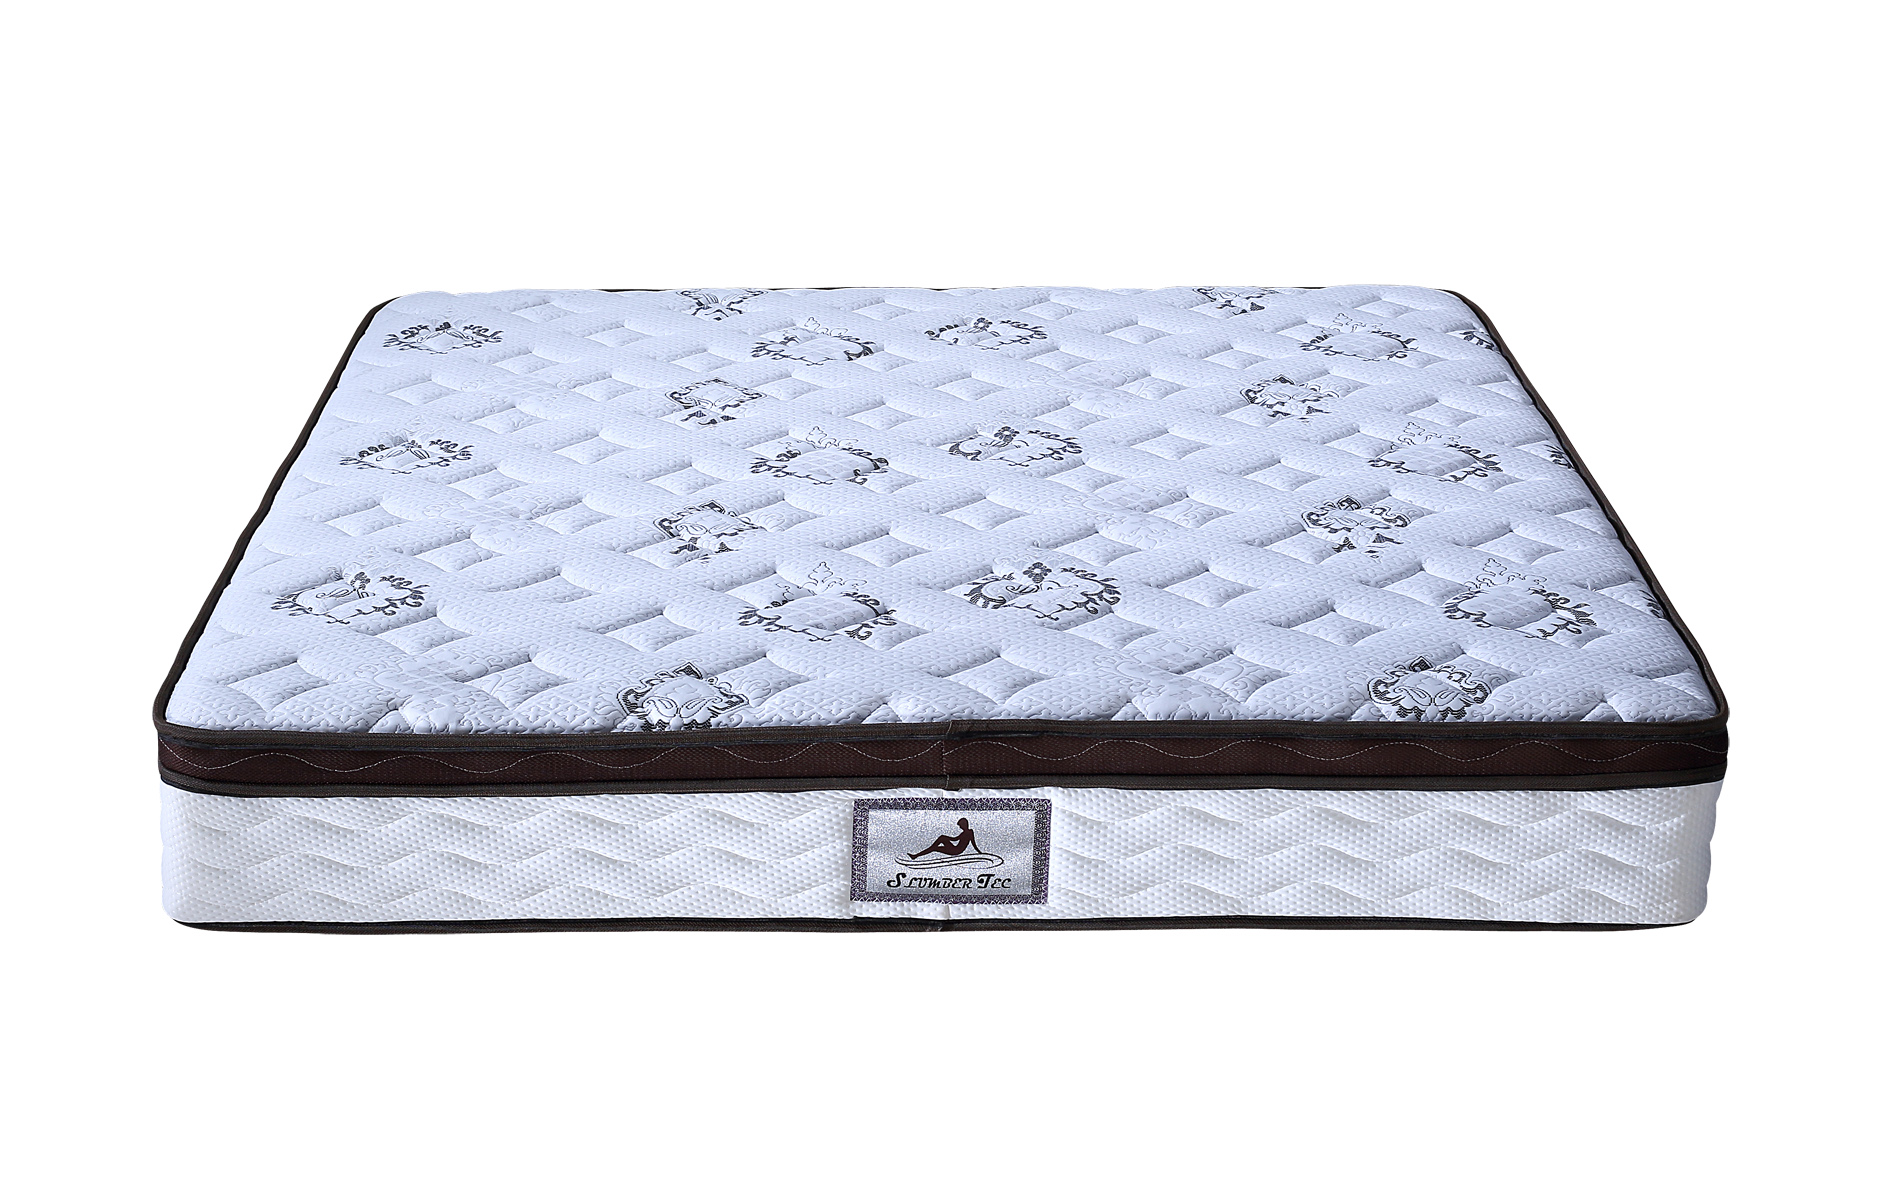 sales direct mattress and furniture